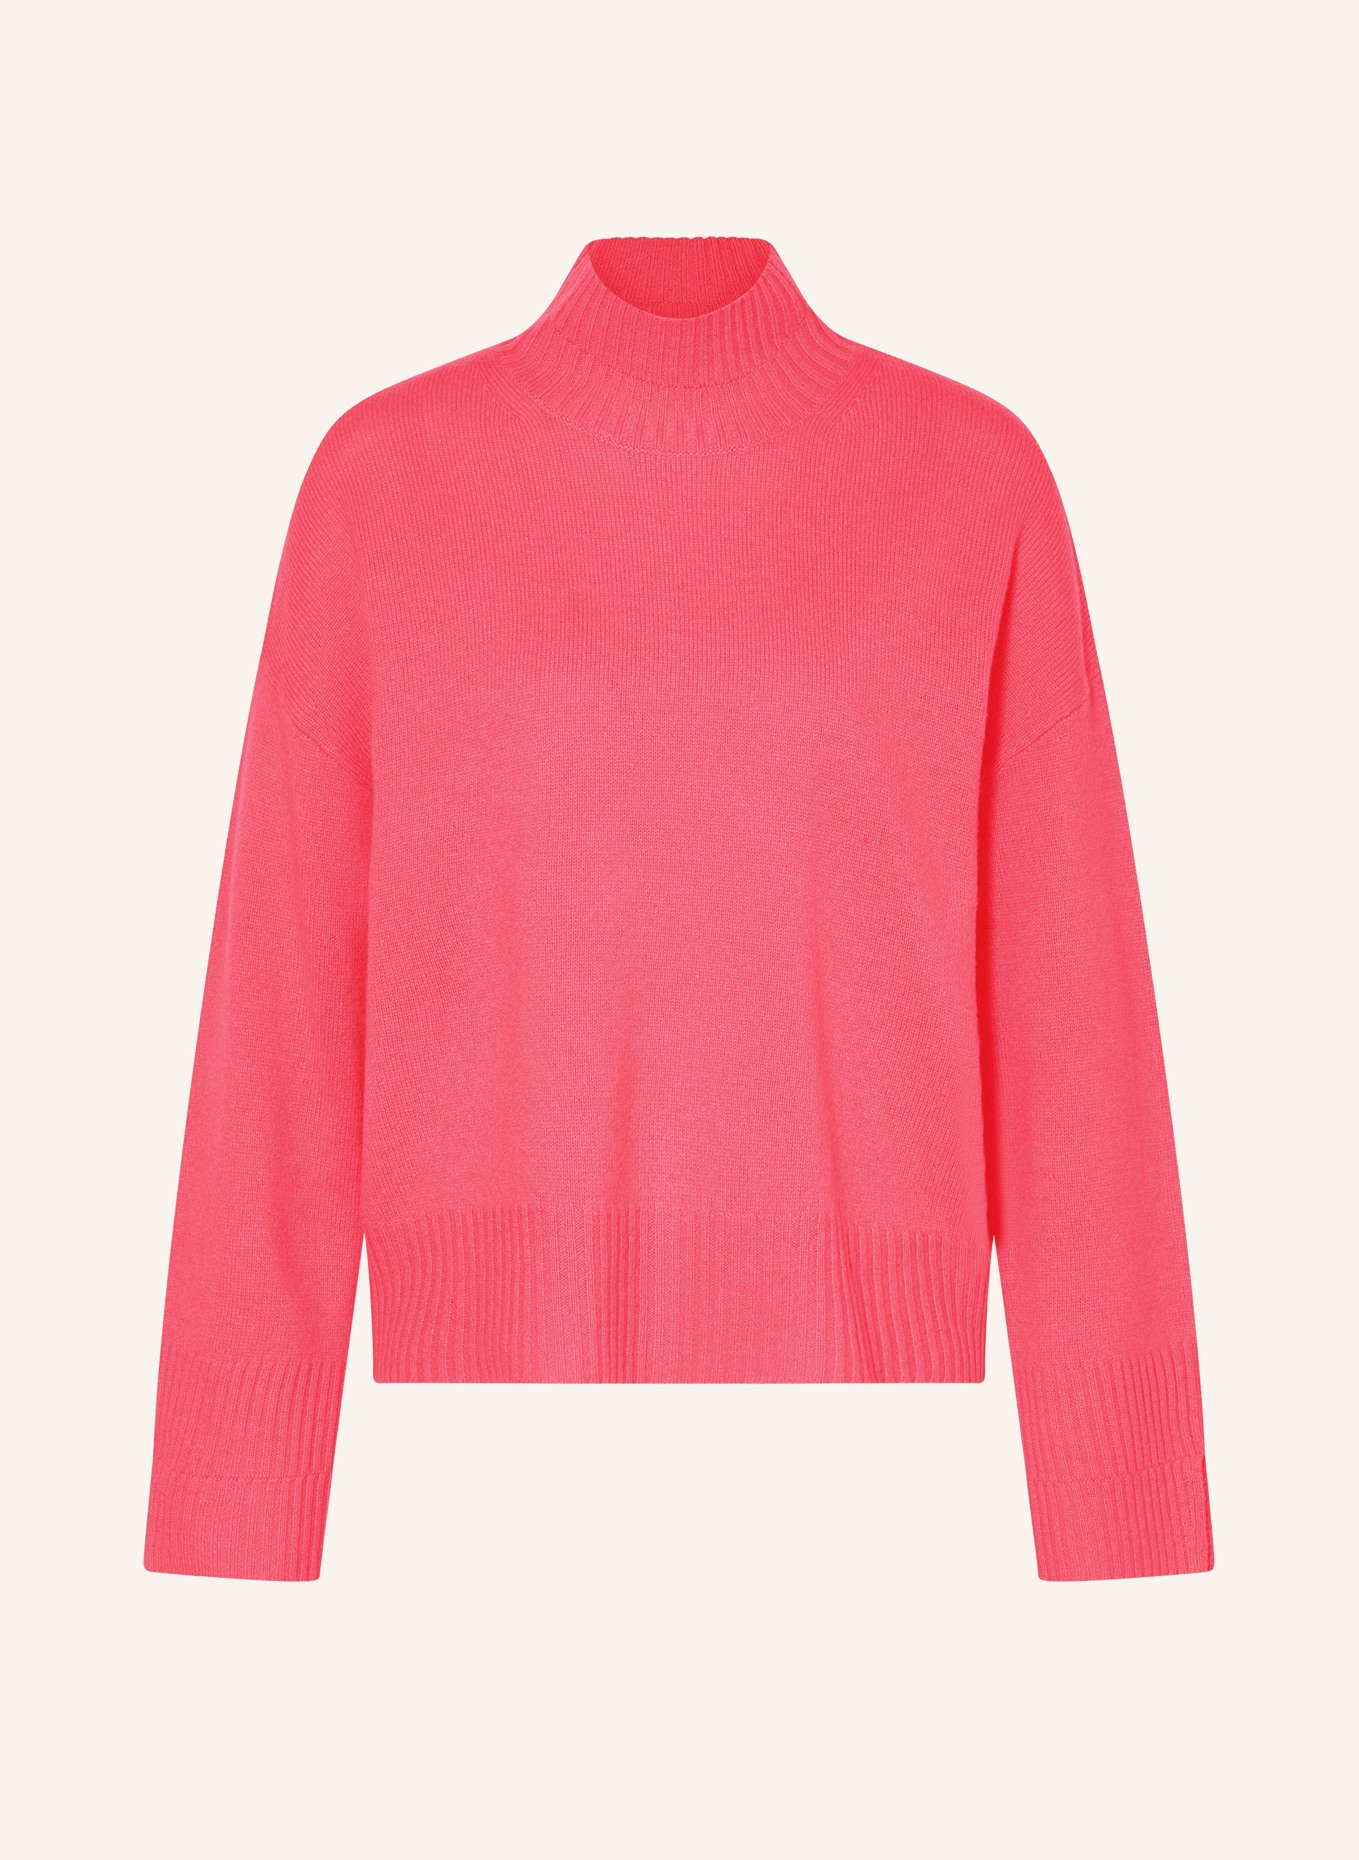 WHISTLES Pullover, Farbe: PINK (Bild 1)